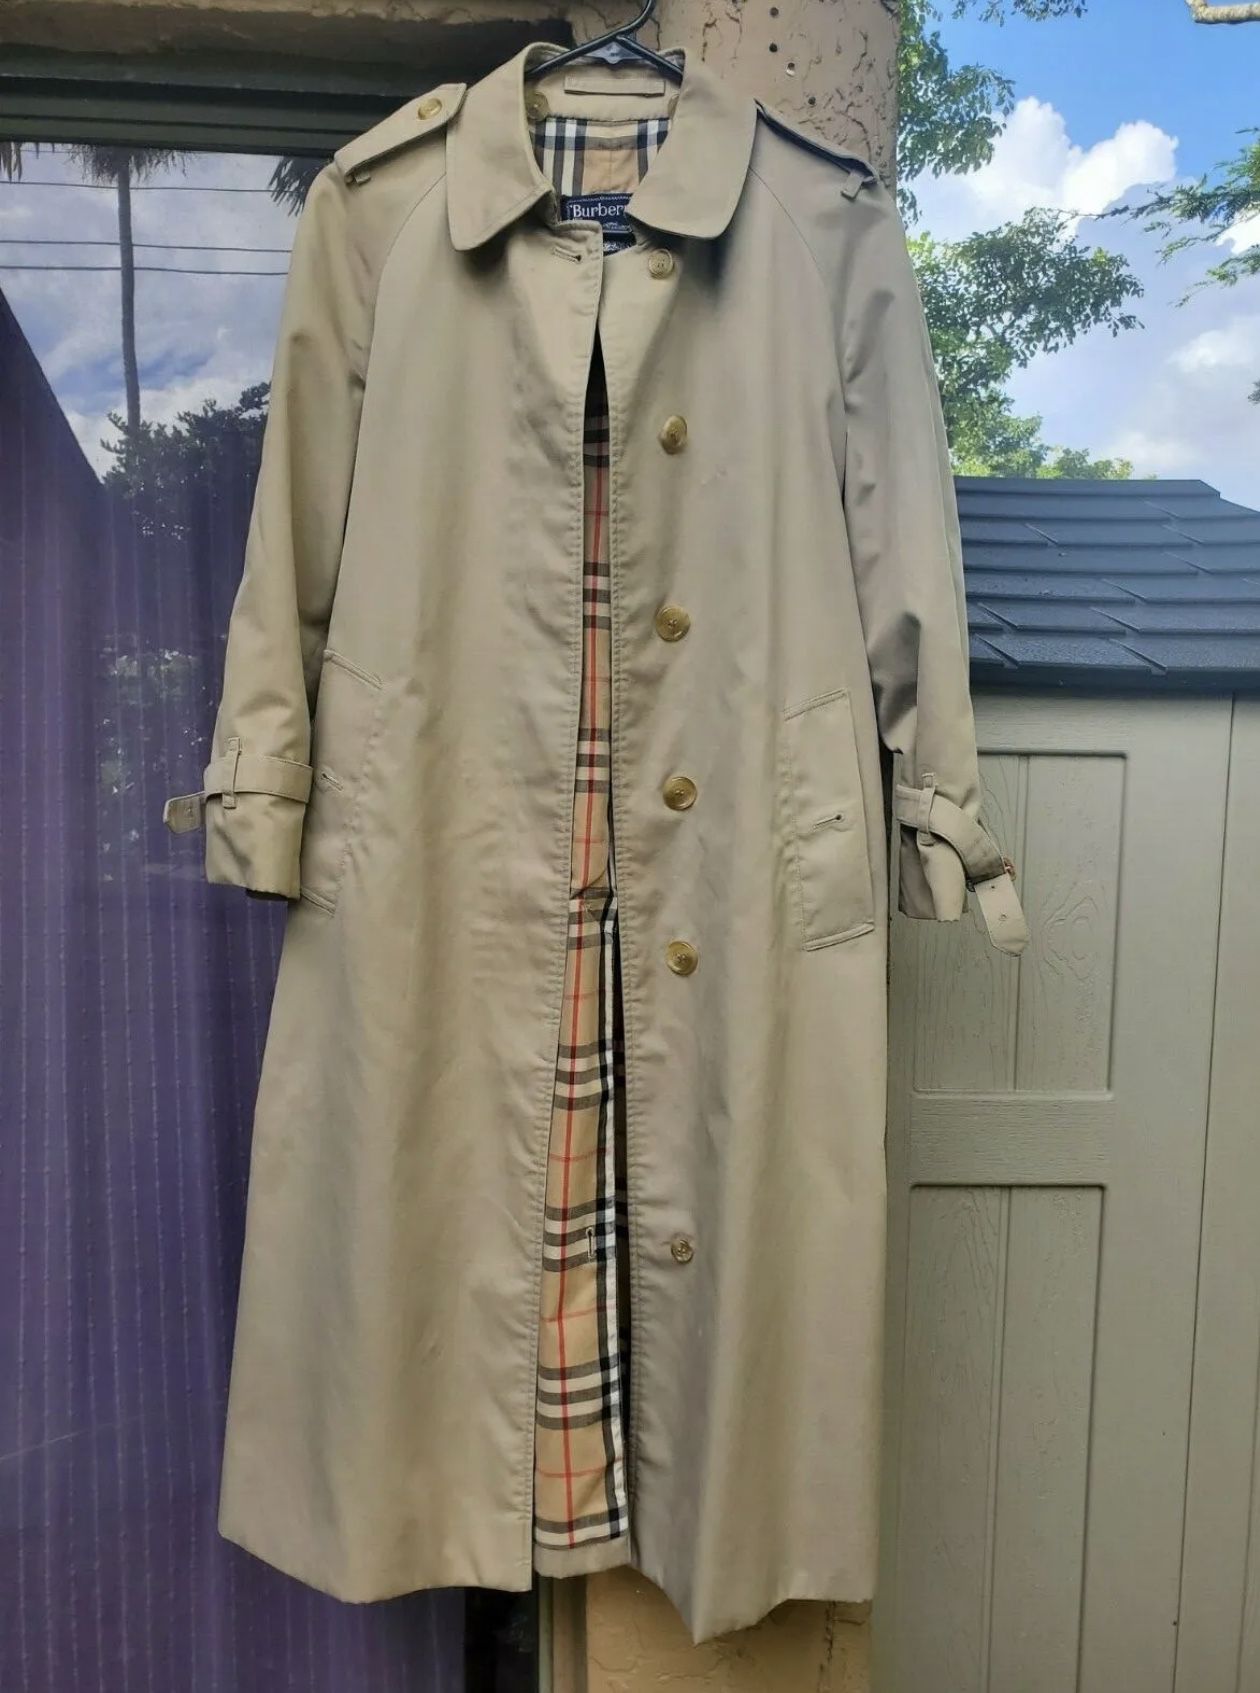 West Kendall - Vintage 1980s Burberry Beige Trench Coat for Sale in Miami,  FL - OfferUp